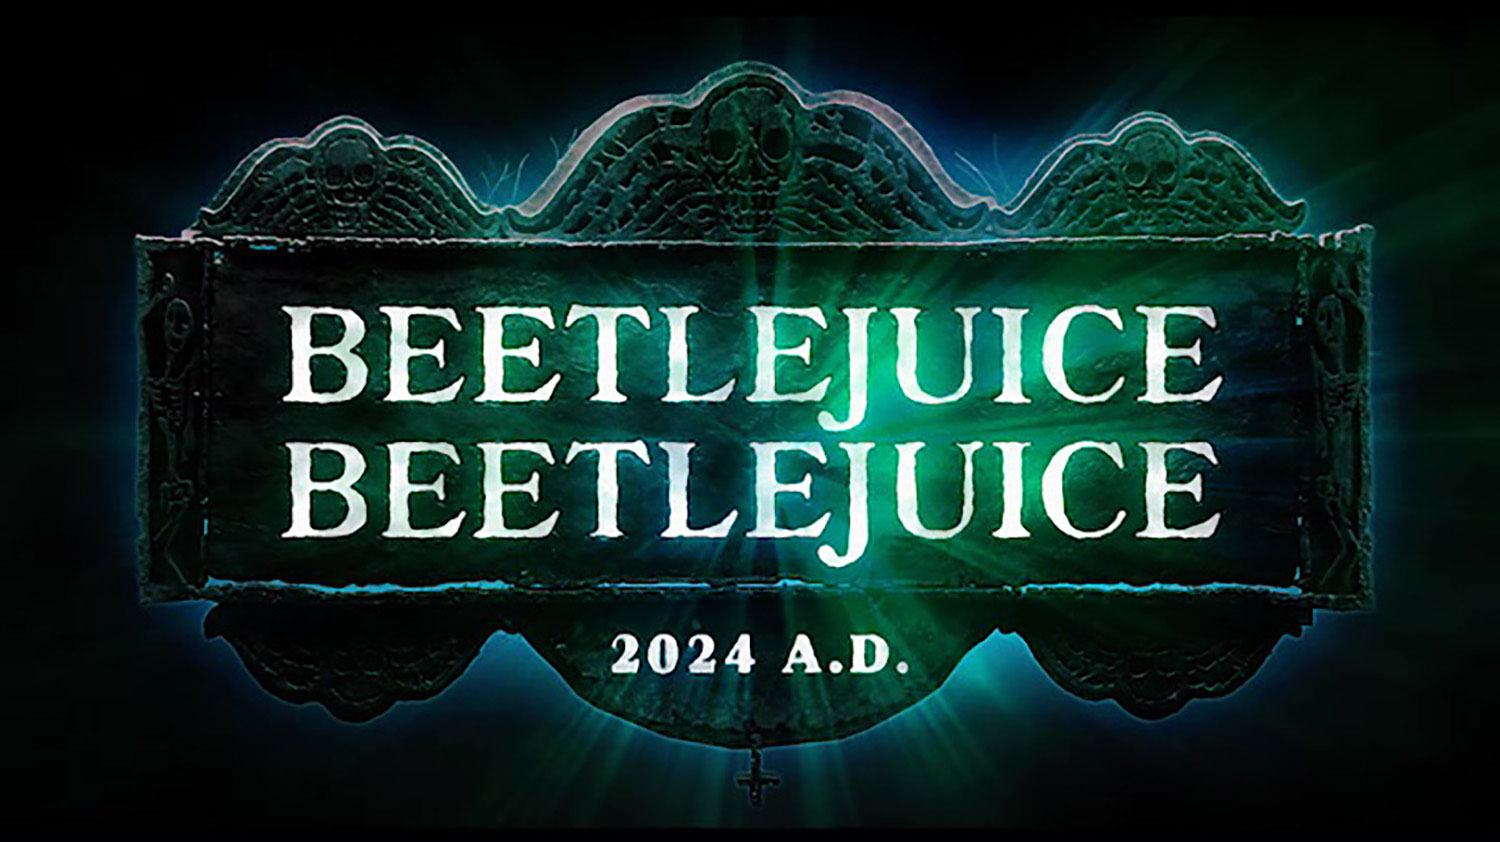 Beetlejuice Beetlejuice is scheduled for release this year